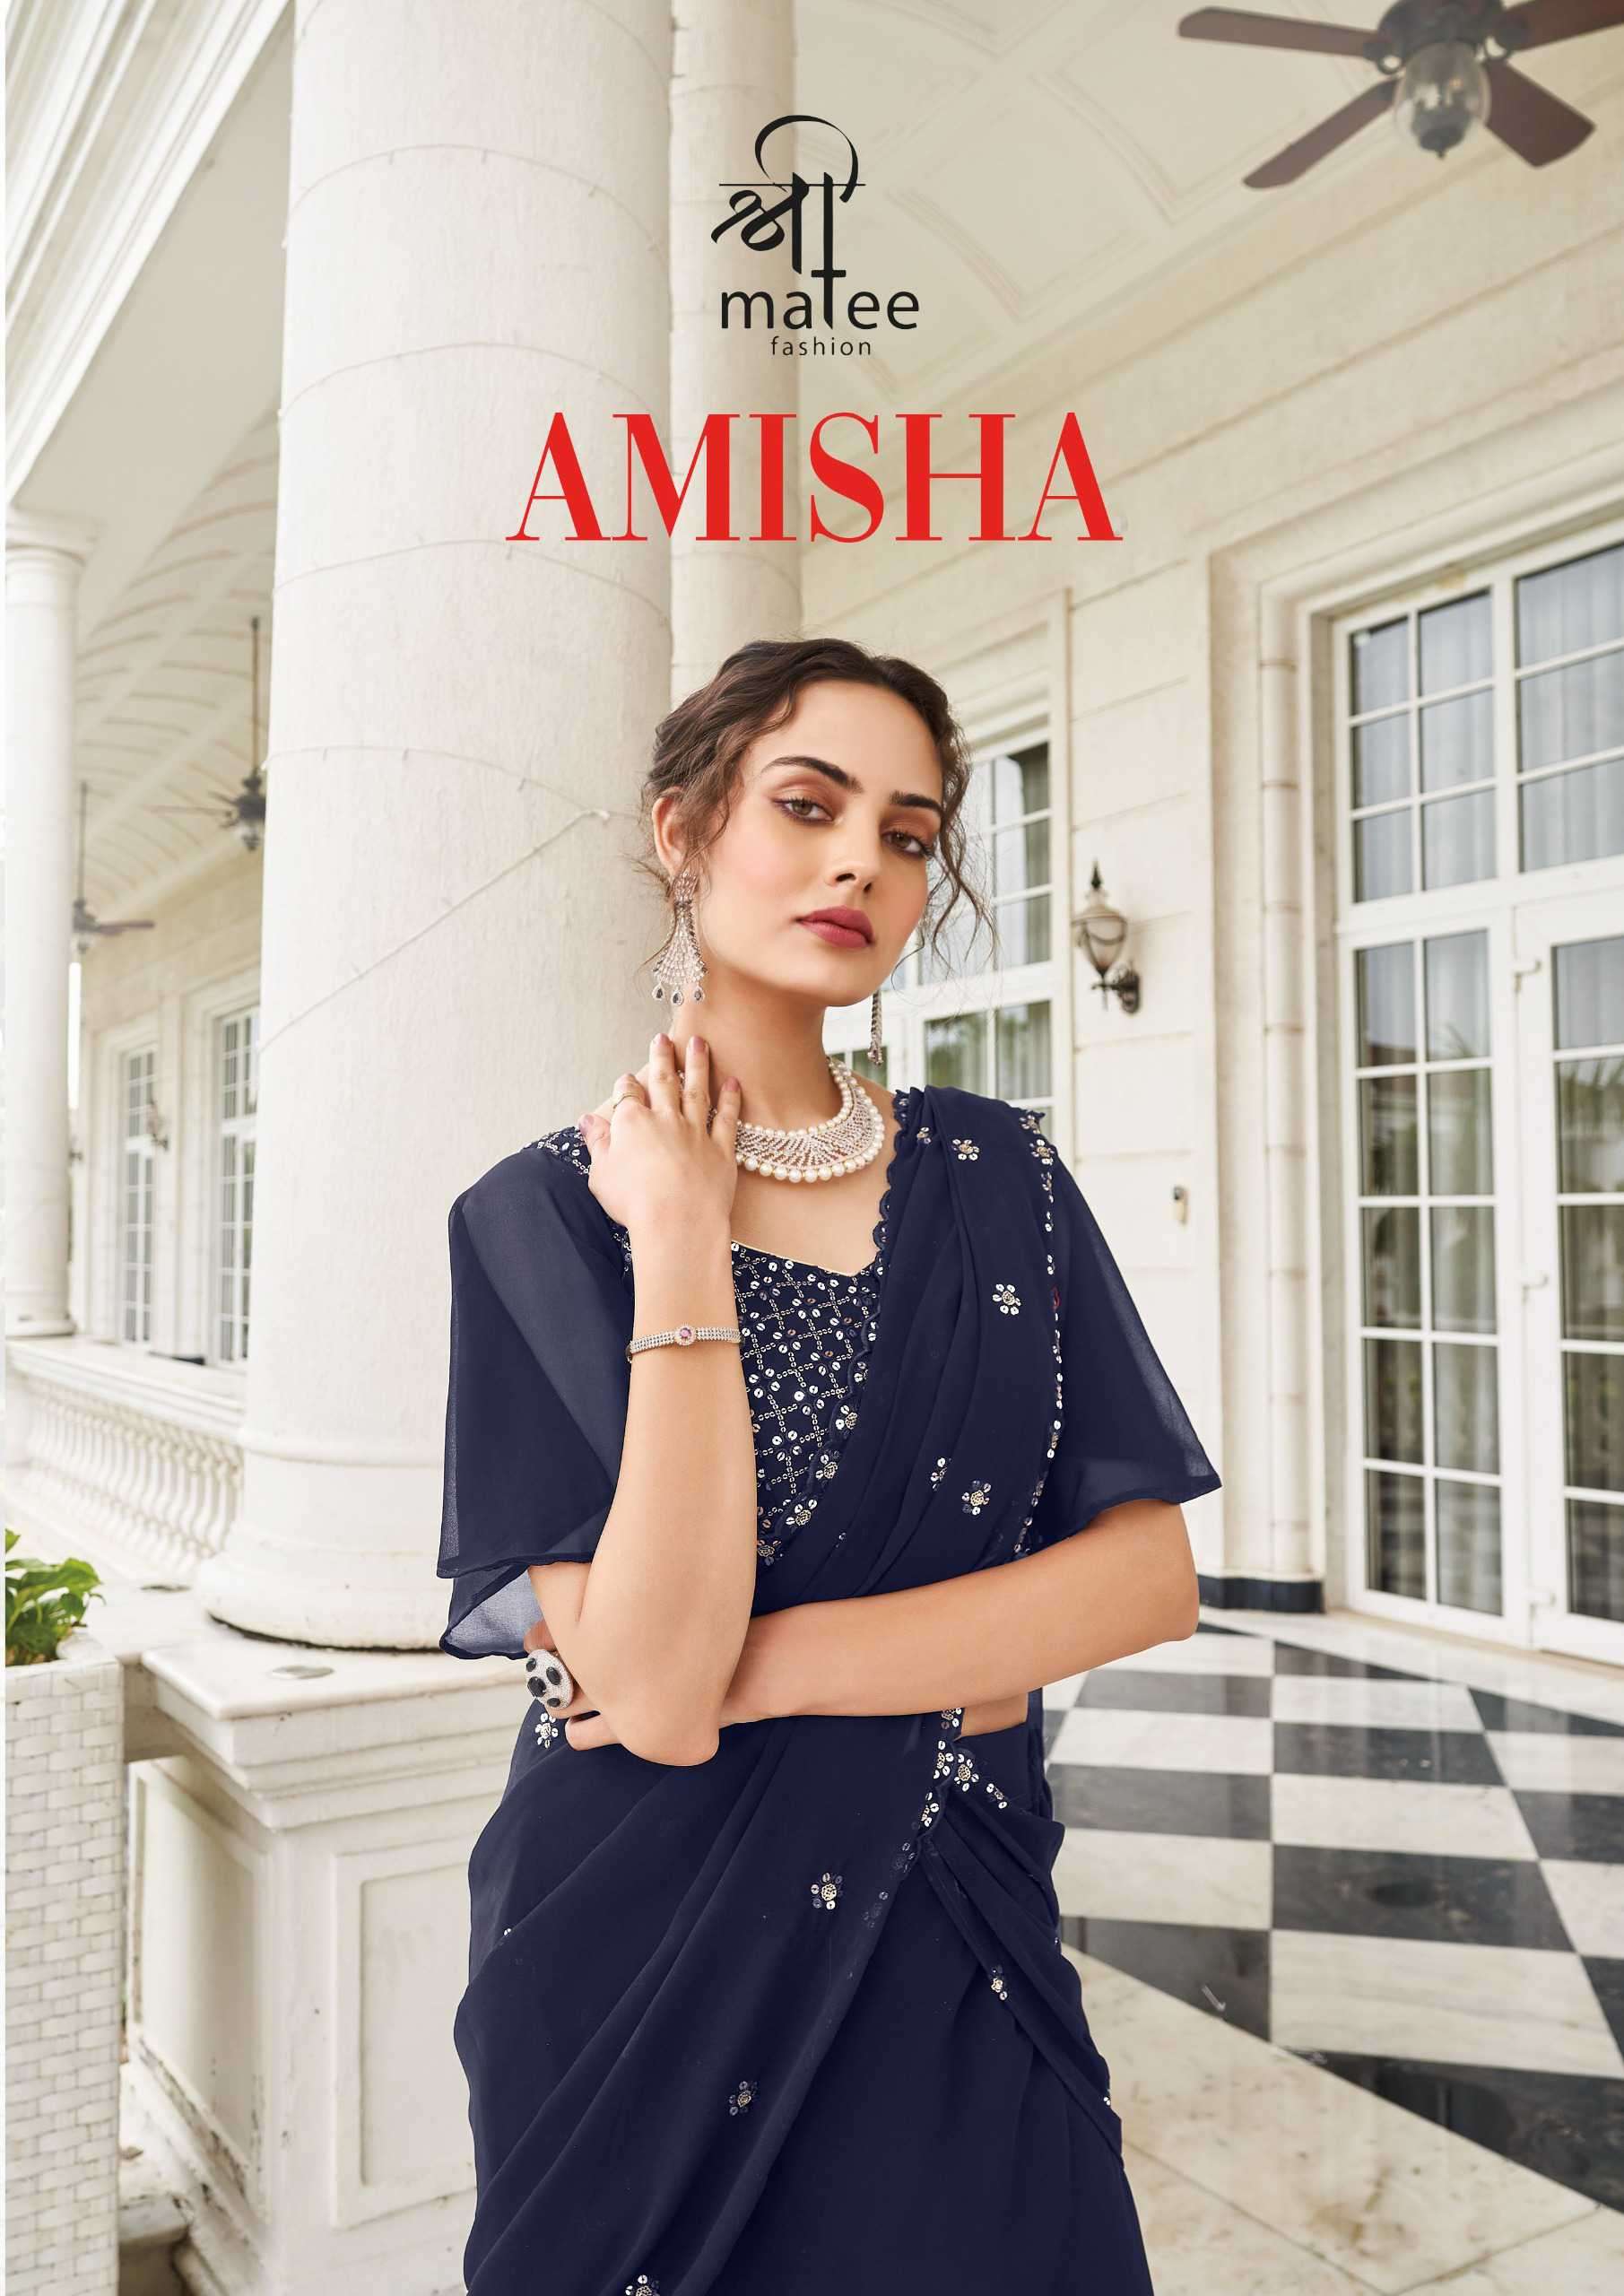 Shreematee Amisha 153 To 156 Latest Designer Partywear Outfit New Arrivals